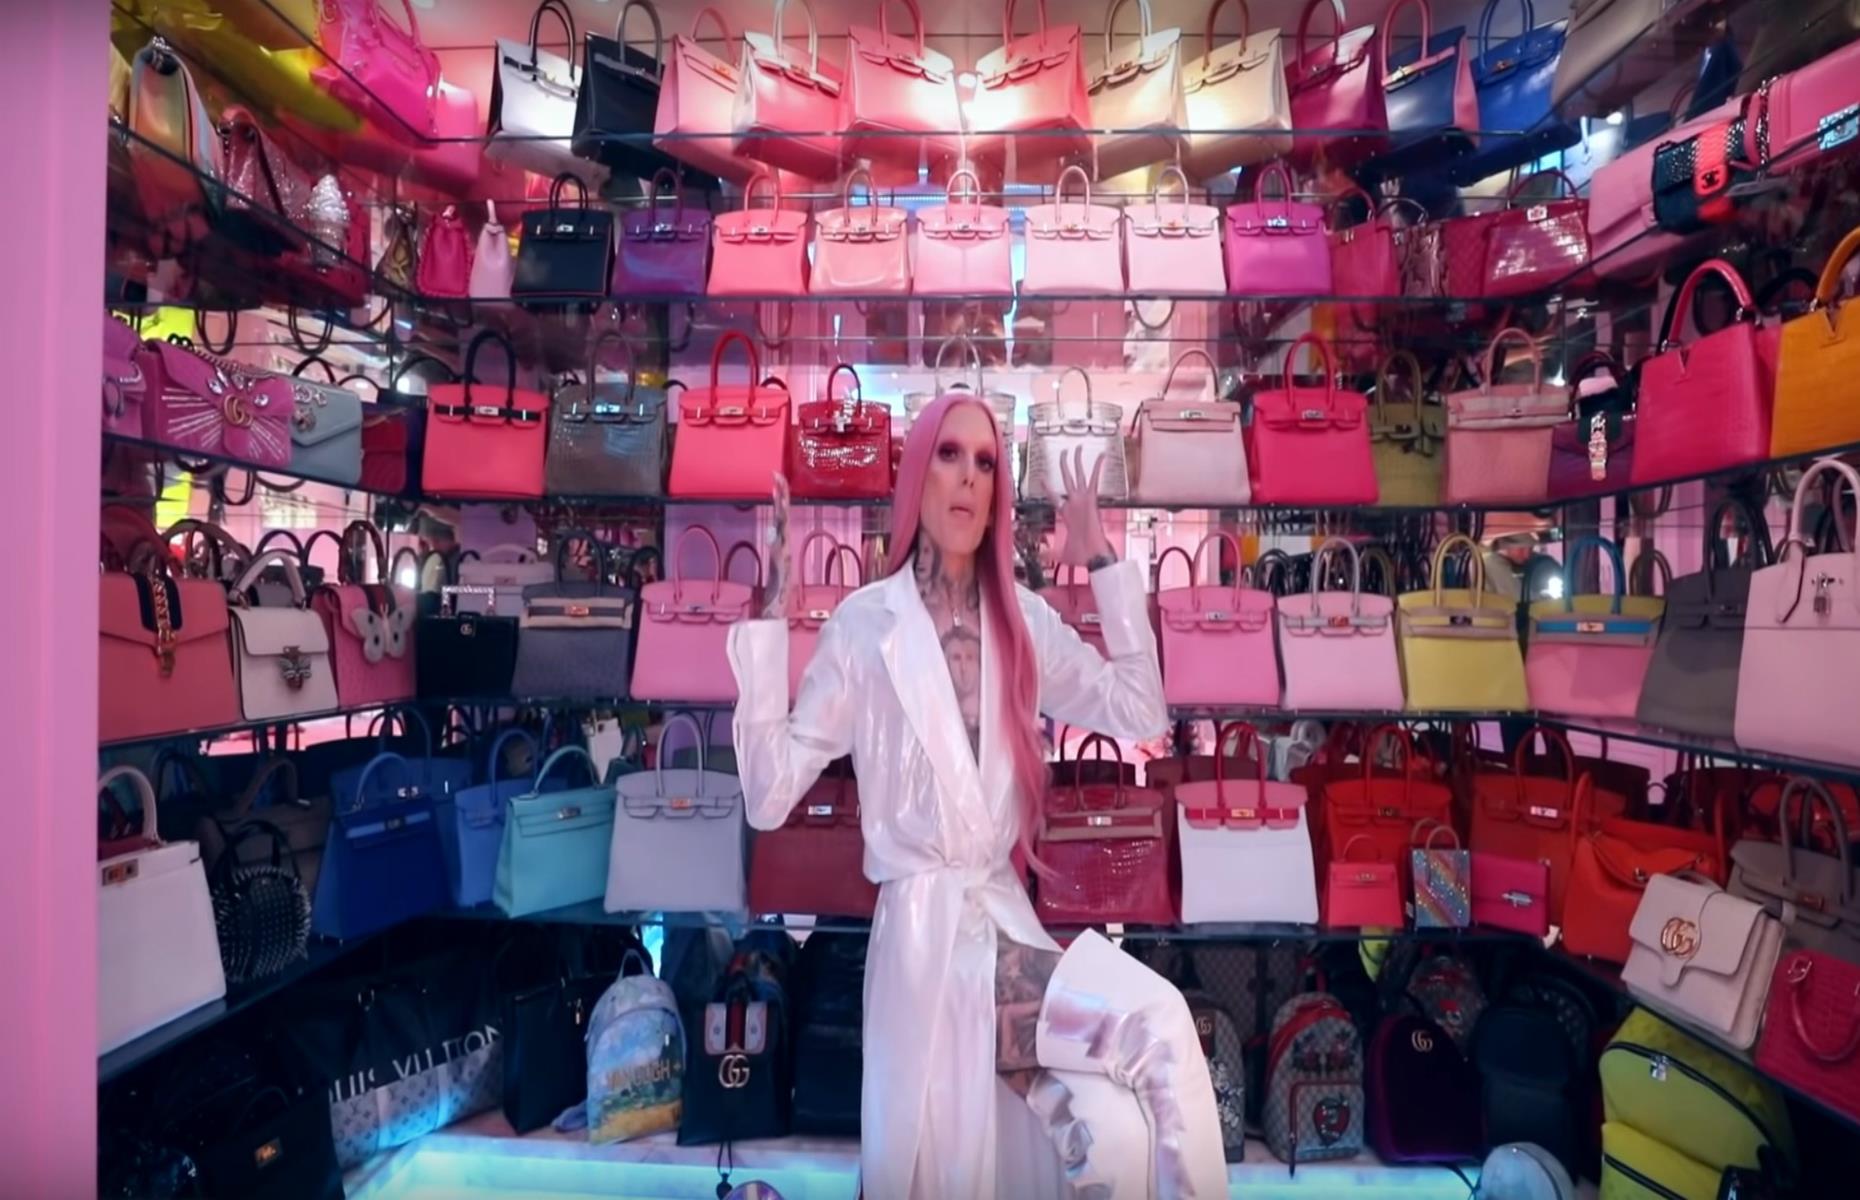 Jeffree Star tours his closet 'vault' with his most valuable items